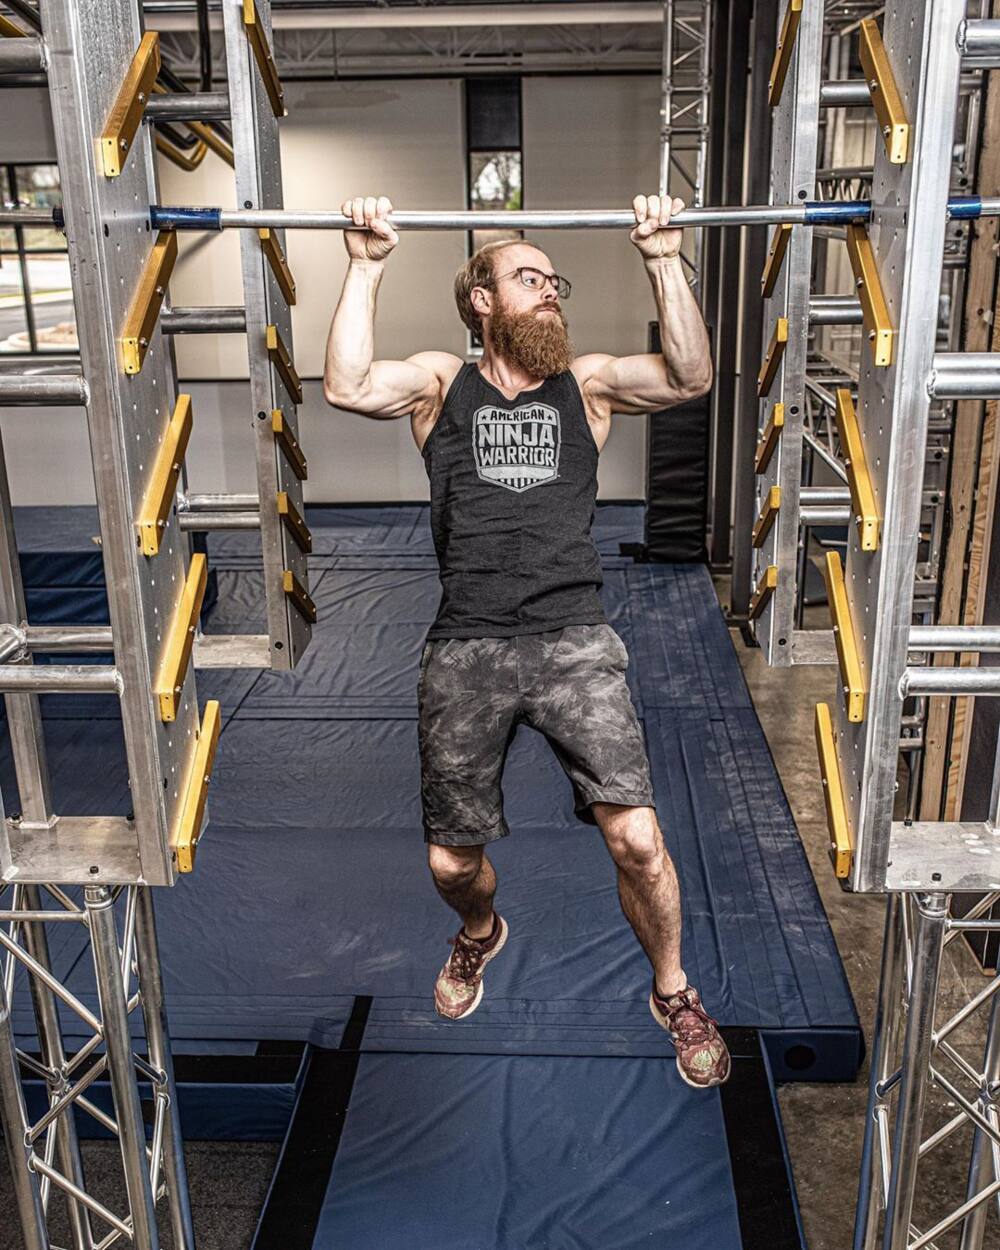 American Ninja Warrior obstacles you can build at home